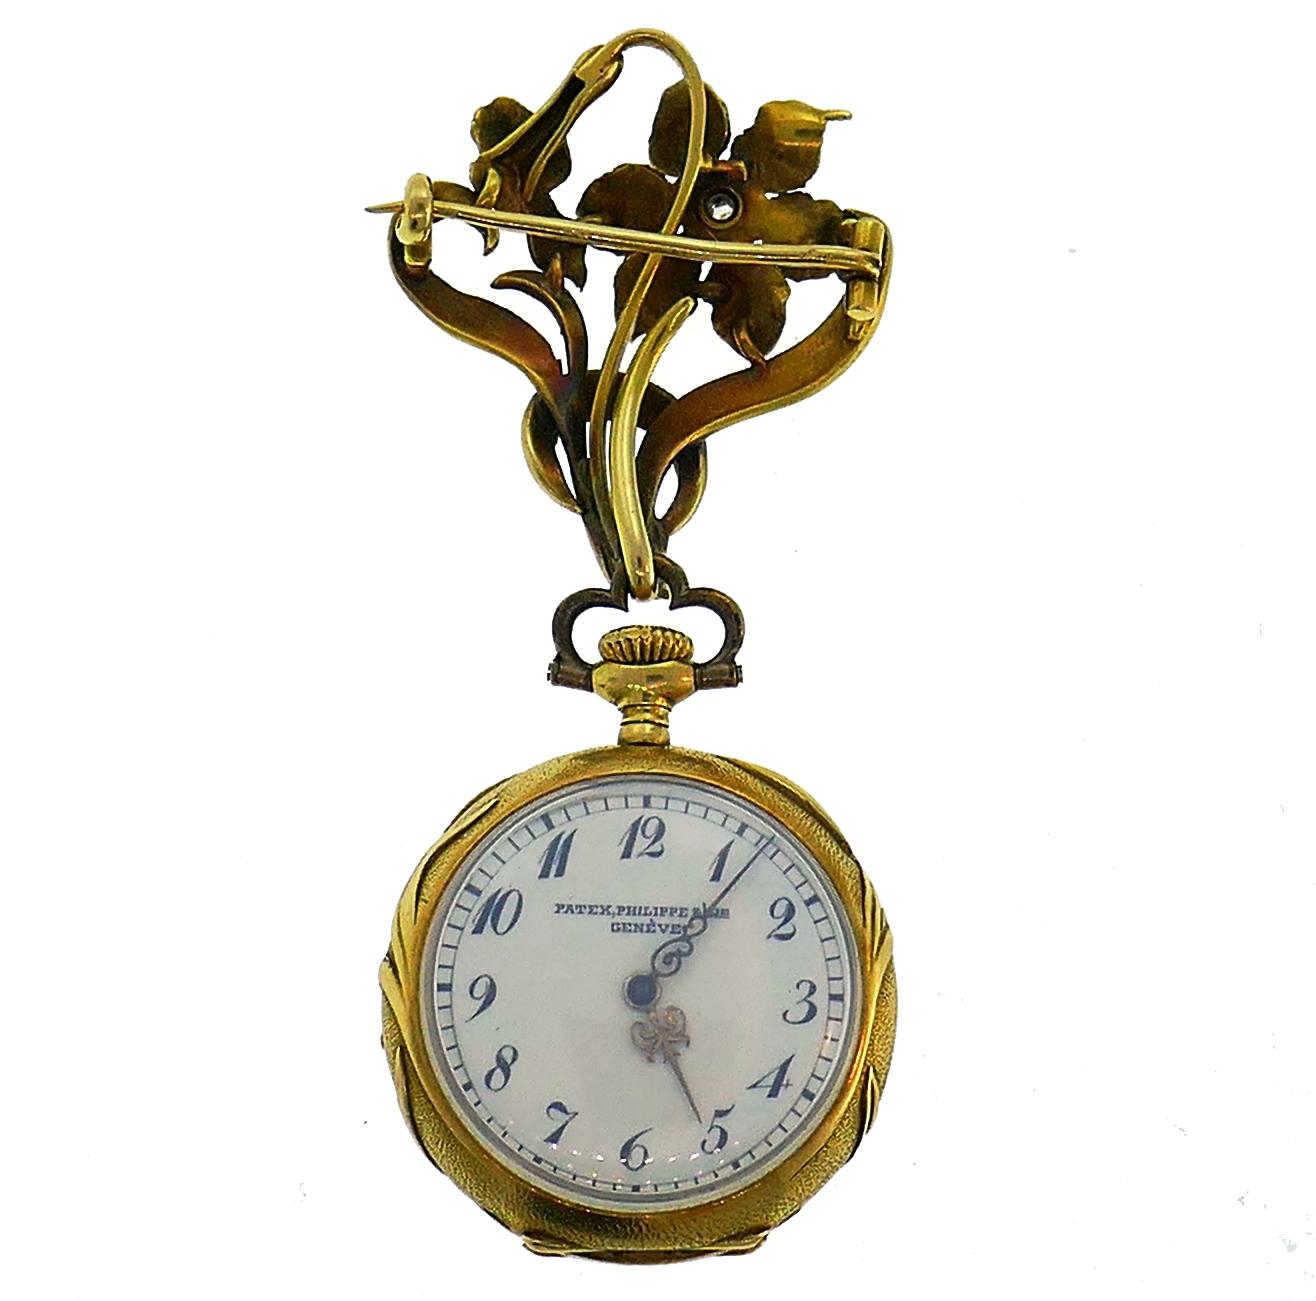 Rare Patek Philippe lapel/pocket watch that would be definitely a conversational piece. It was created in Switzerland in the 1900s. Made of 18 karat (stamped) yellow gold. The movement is original Patek Philippe manual hand-winded, numbered